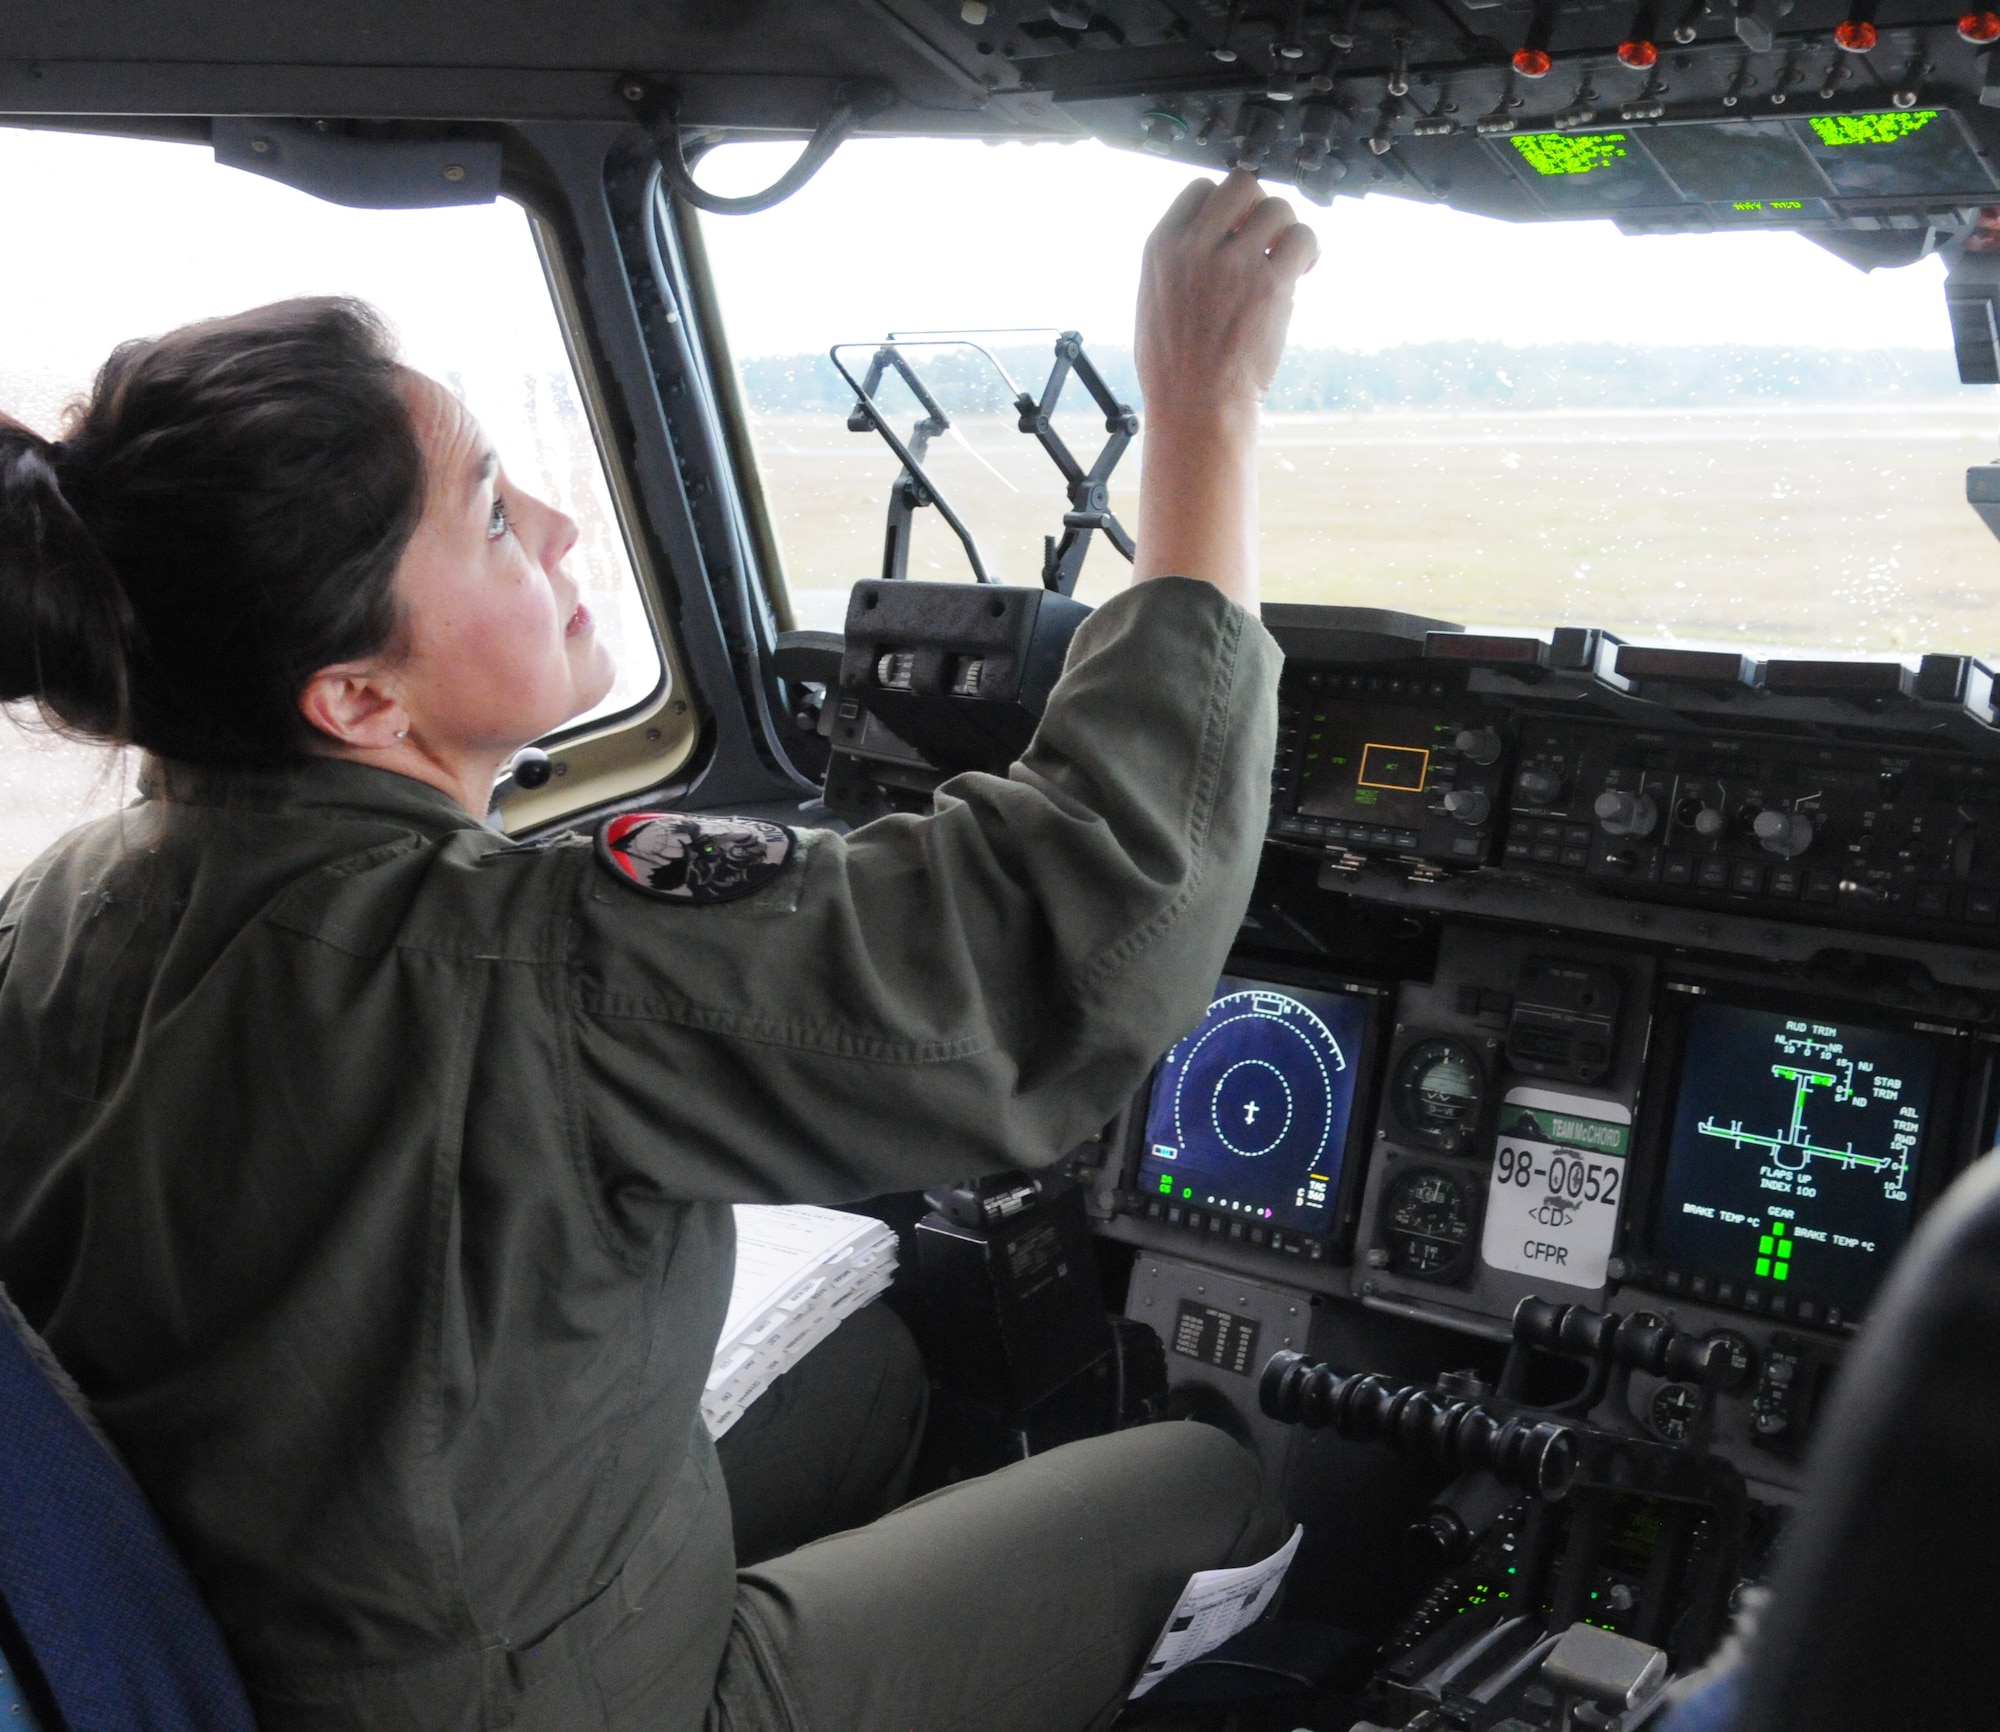 Lt. Col. Stephanie Severe, an Air Force Reserve pilot assigned to the 313th Airlift Squadron here, performs pre-flight checks before take off in a C-17 Globemaster III on March 15, 2021.